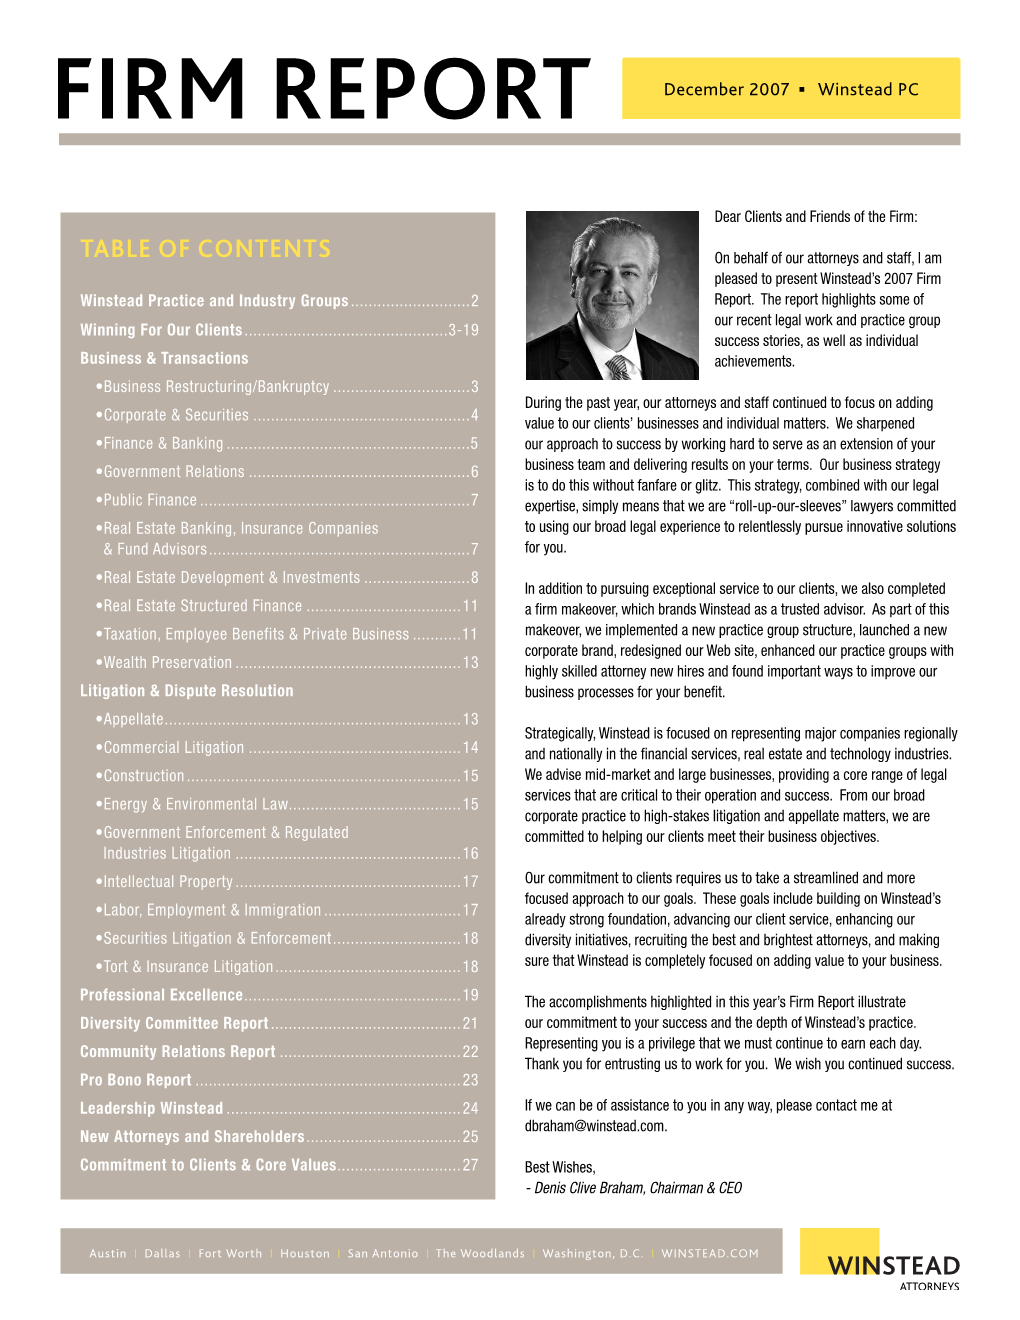 Table of Contents on Behalf of Our Attorneys and Staff, I Am Pleased to Present Winstead’S 2007 Firm Winstead Practice and Industry Groups